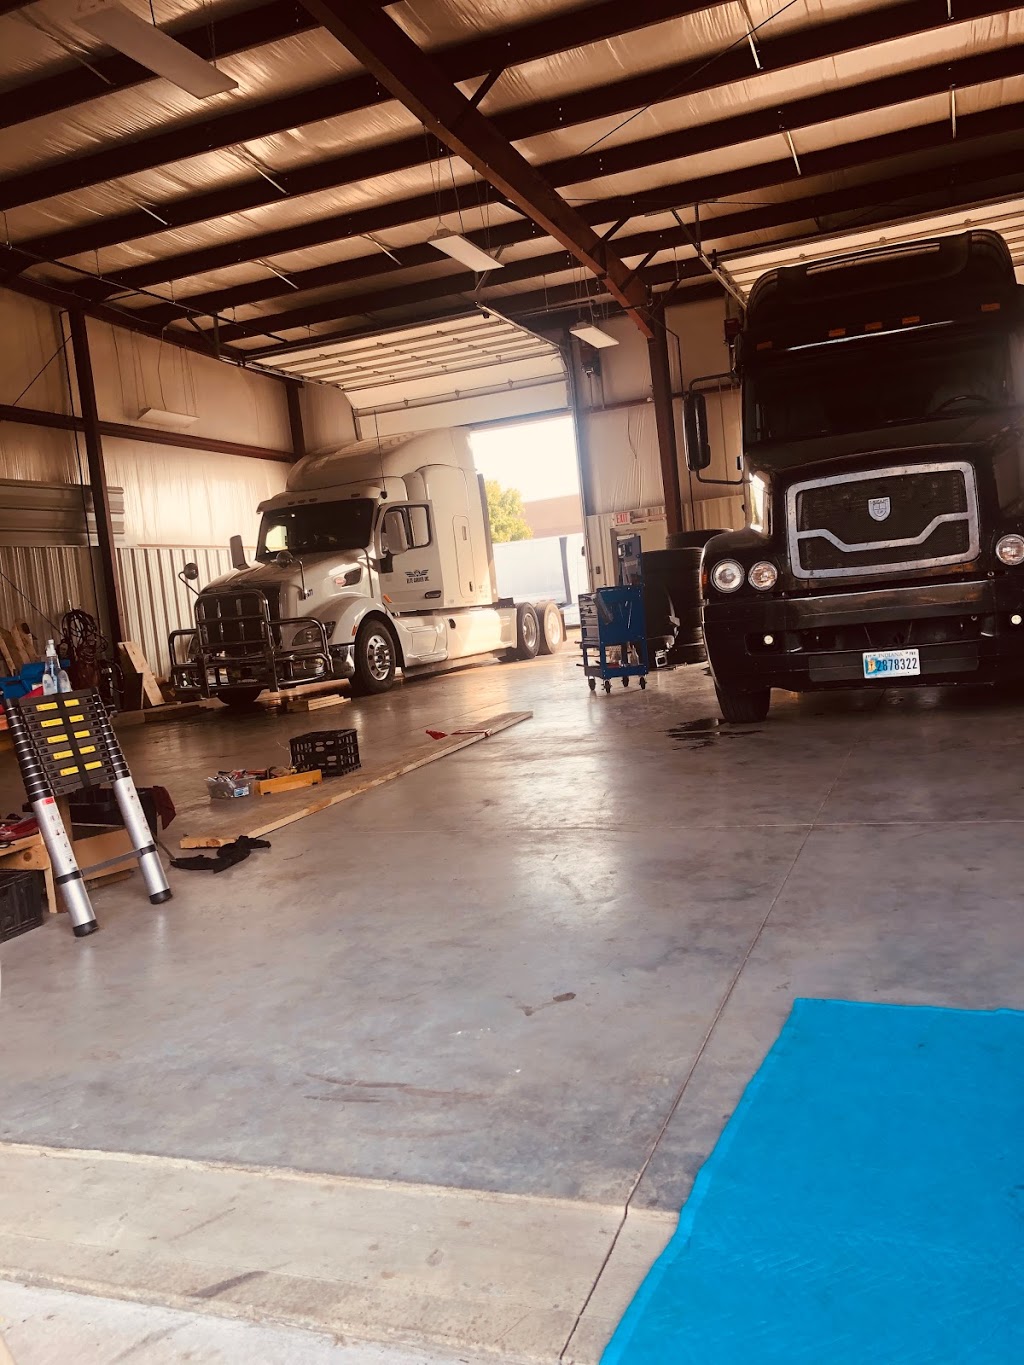 COMMERCIAL TRUCK & TRAILER REPAIR | 7720 W New York St, Indianapolis, IN 46214, USA | Phone: (317) 991-2434